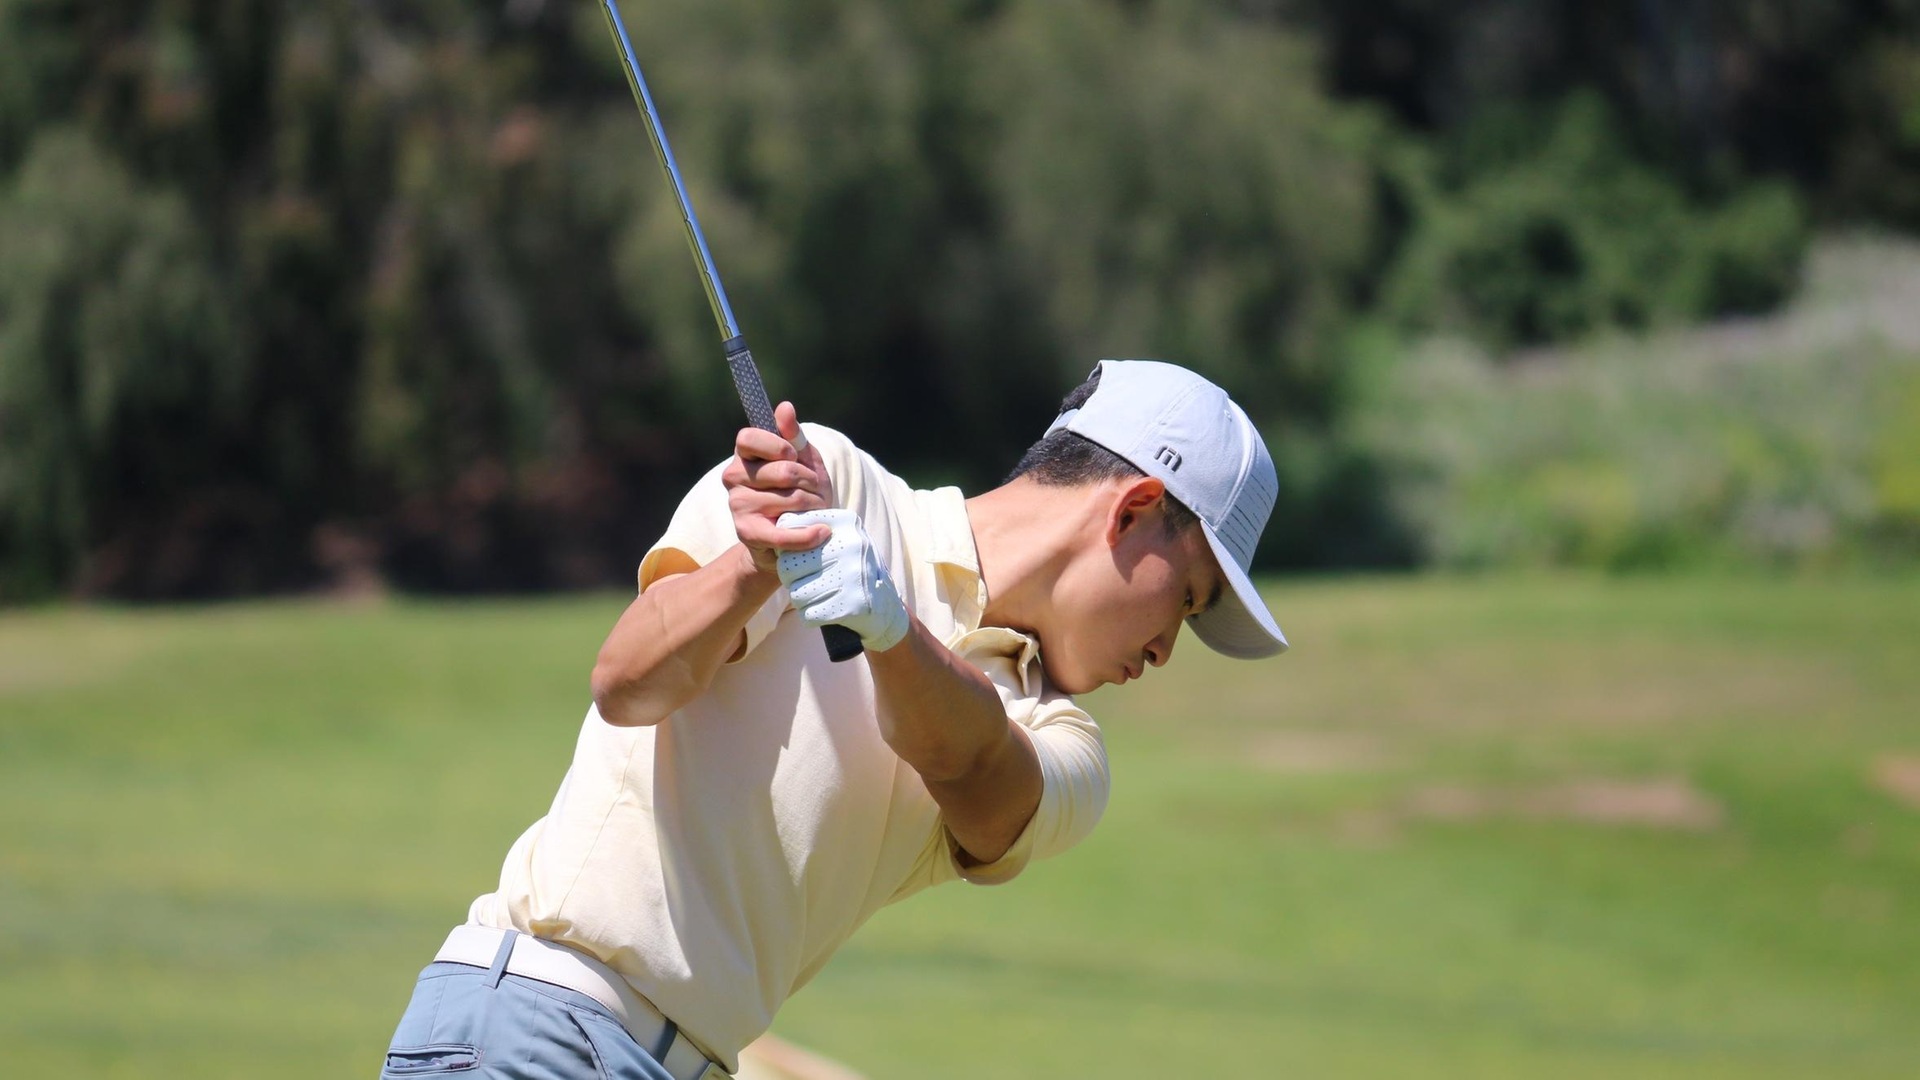 Michael Ma had a 70 to tie for the low round of the day